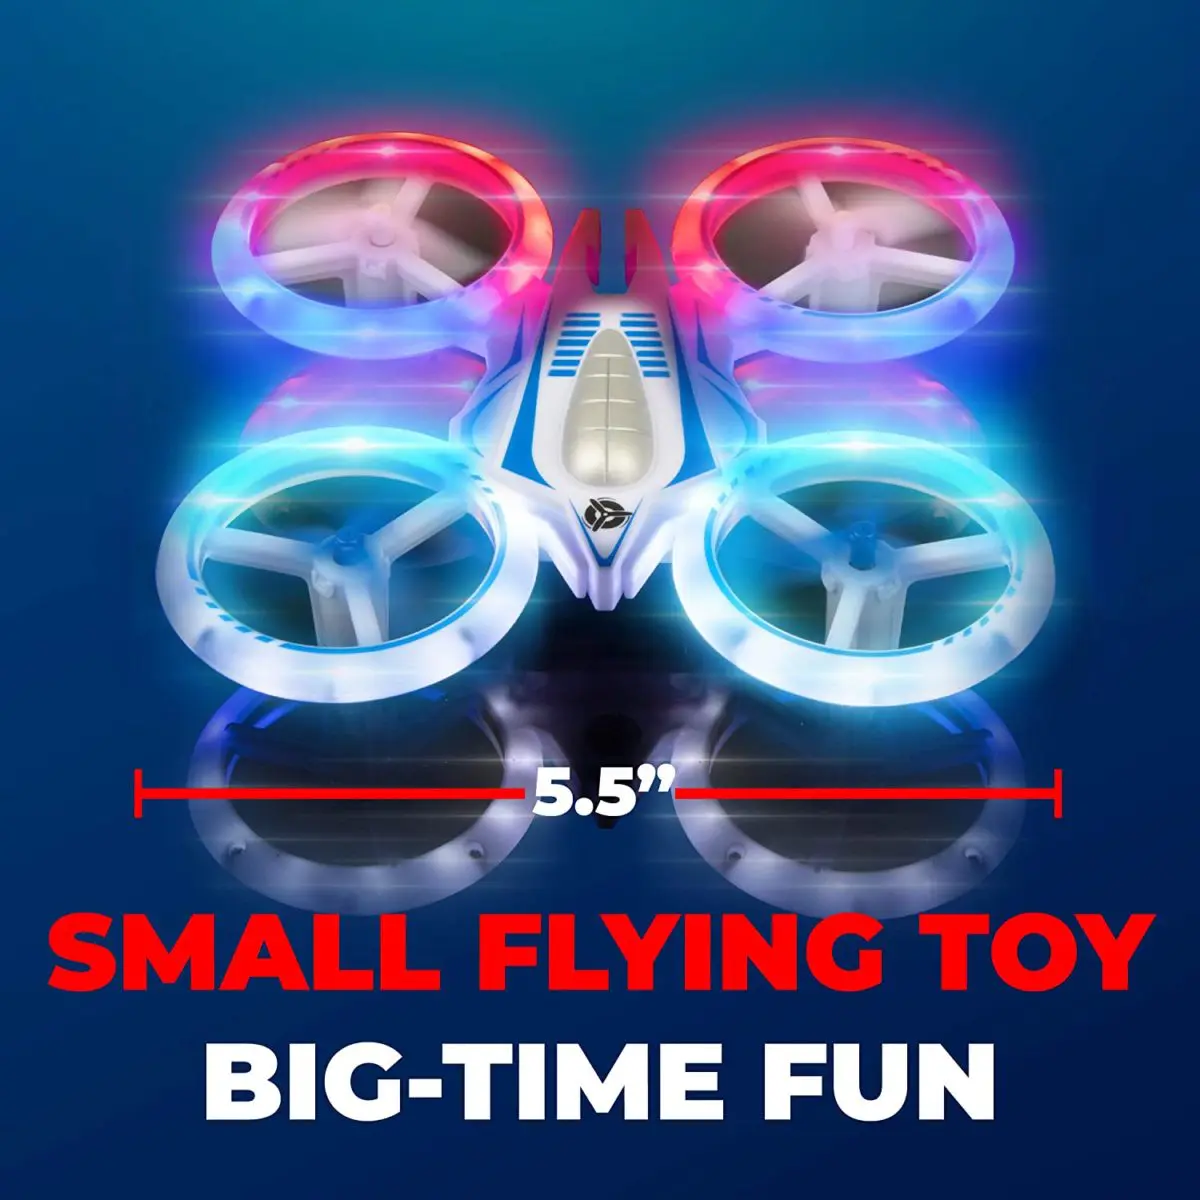 Force1 UFO 4000 LED Mini Drones for Kids - Top Toys and Gifts for Eight Year Old Boys 2